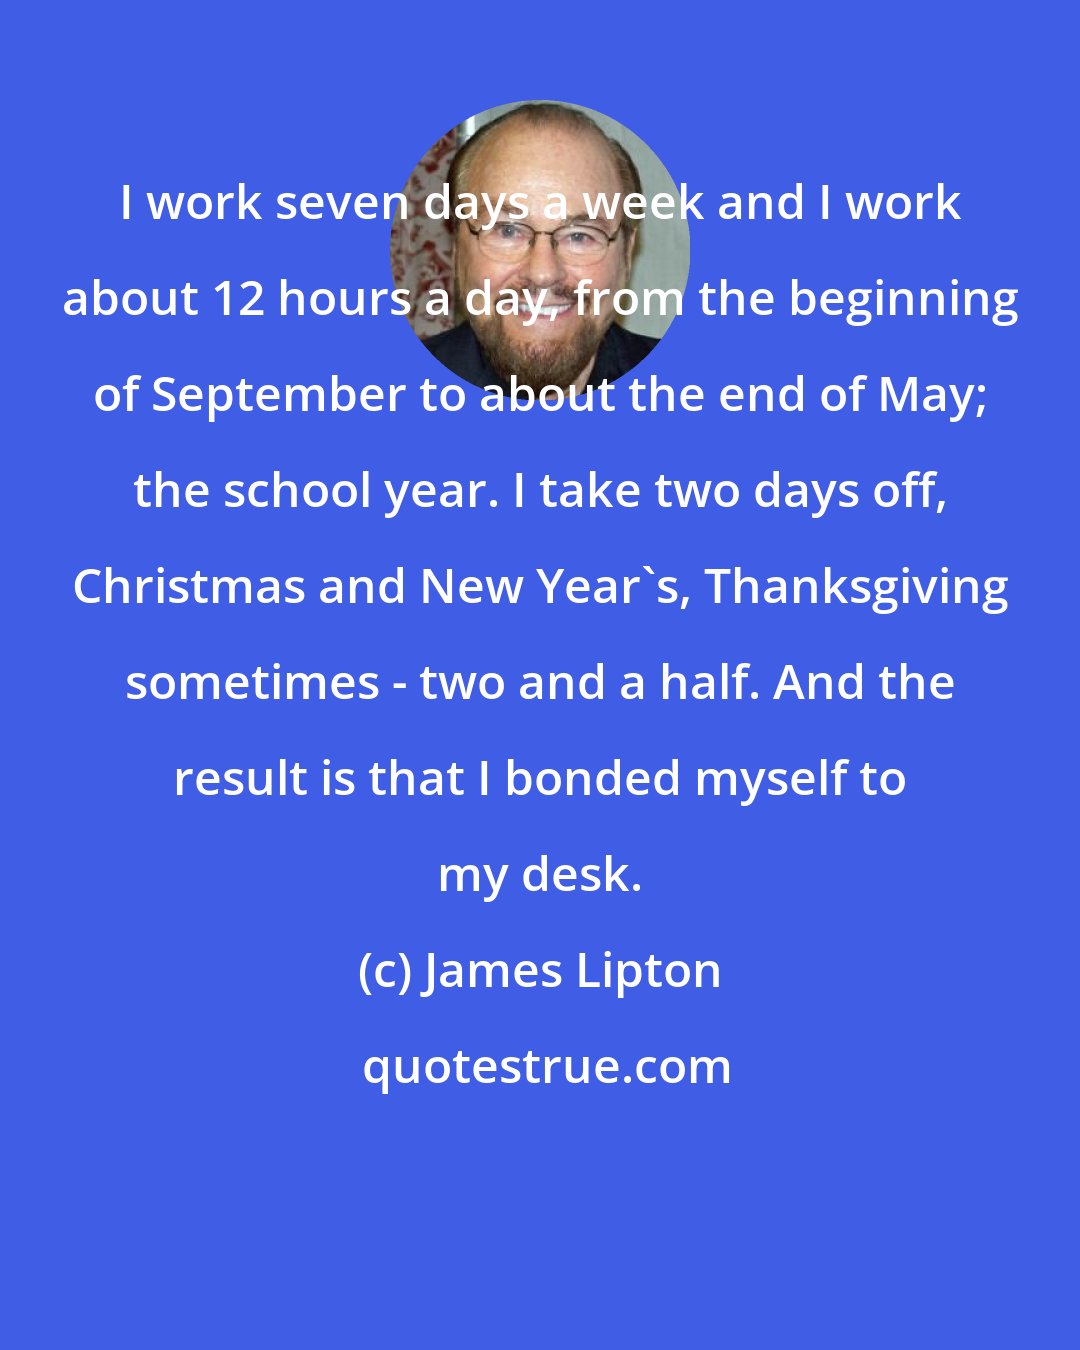 James Lipton: I work seven days a week and I work about 12 hours a day, from the beginning of September to about the end of May; the school year. I take two days off, Christmas and New Year's, Thanksgiving sometimes - two and a half. And the result is that I bonded myself to my desk.